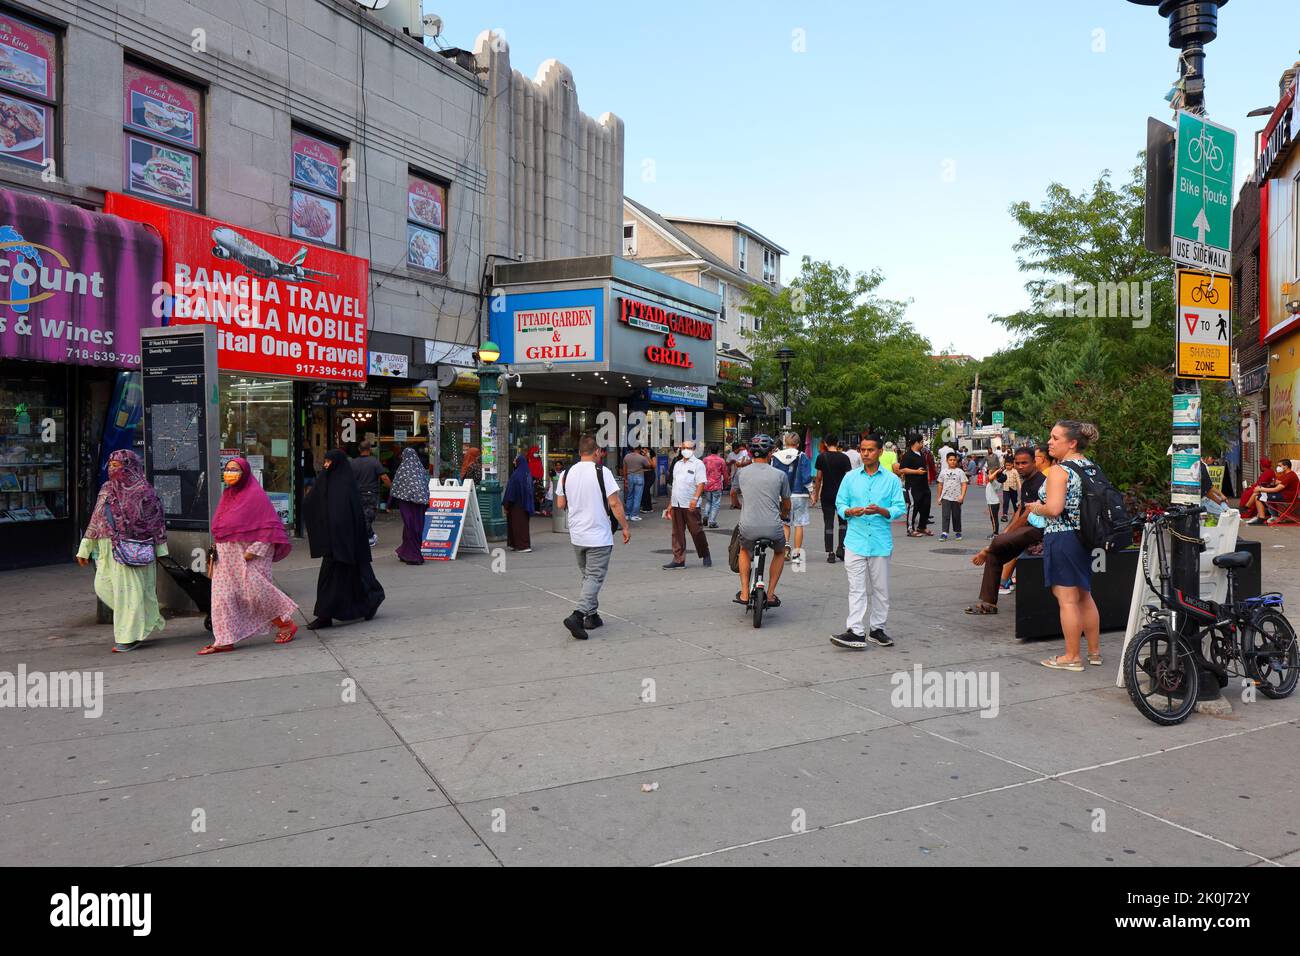 People, shoppers at Diversity Plaza, a pedestrian plaza located at 37th Rd between 73rd and 74th Sts, Jackson Heights, Queens, New York, Aug 30, 2022 Stock Photo